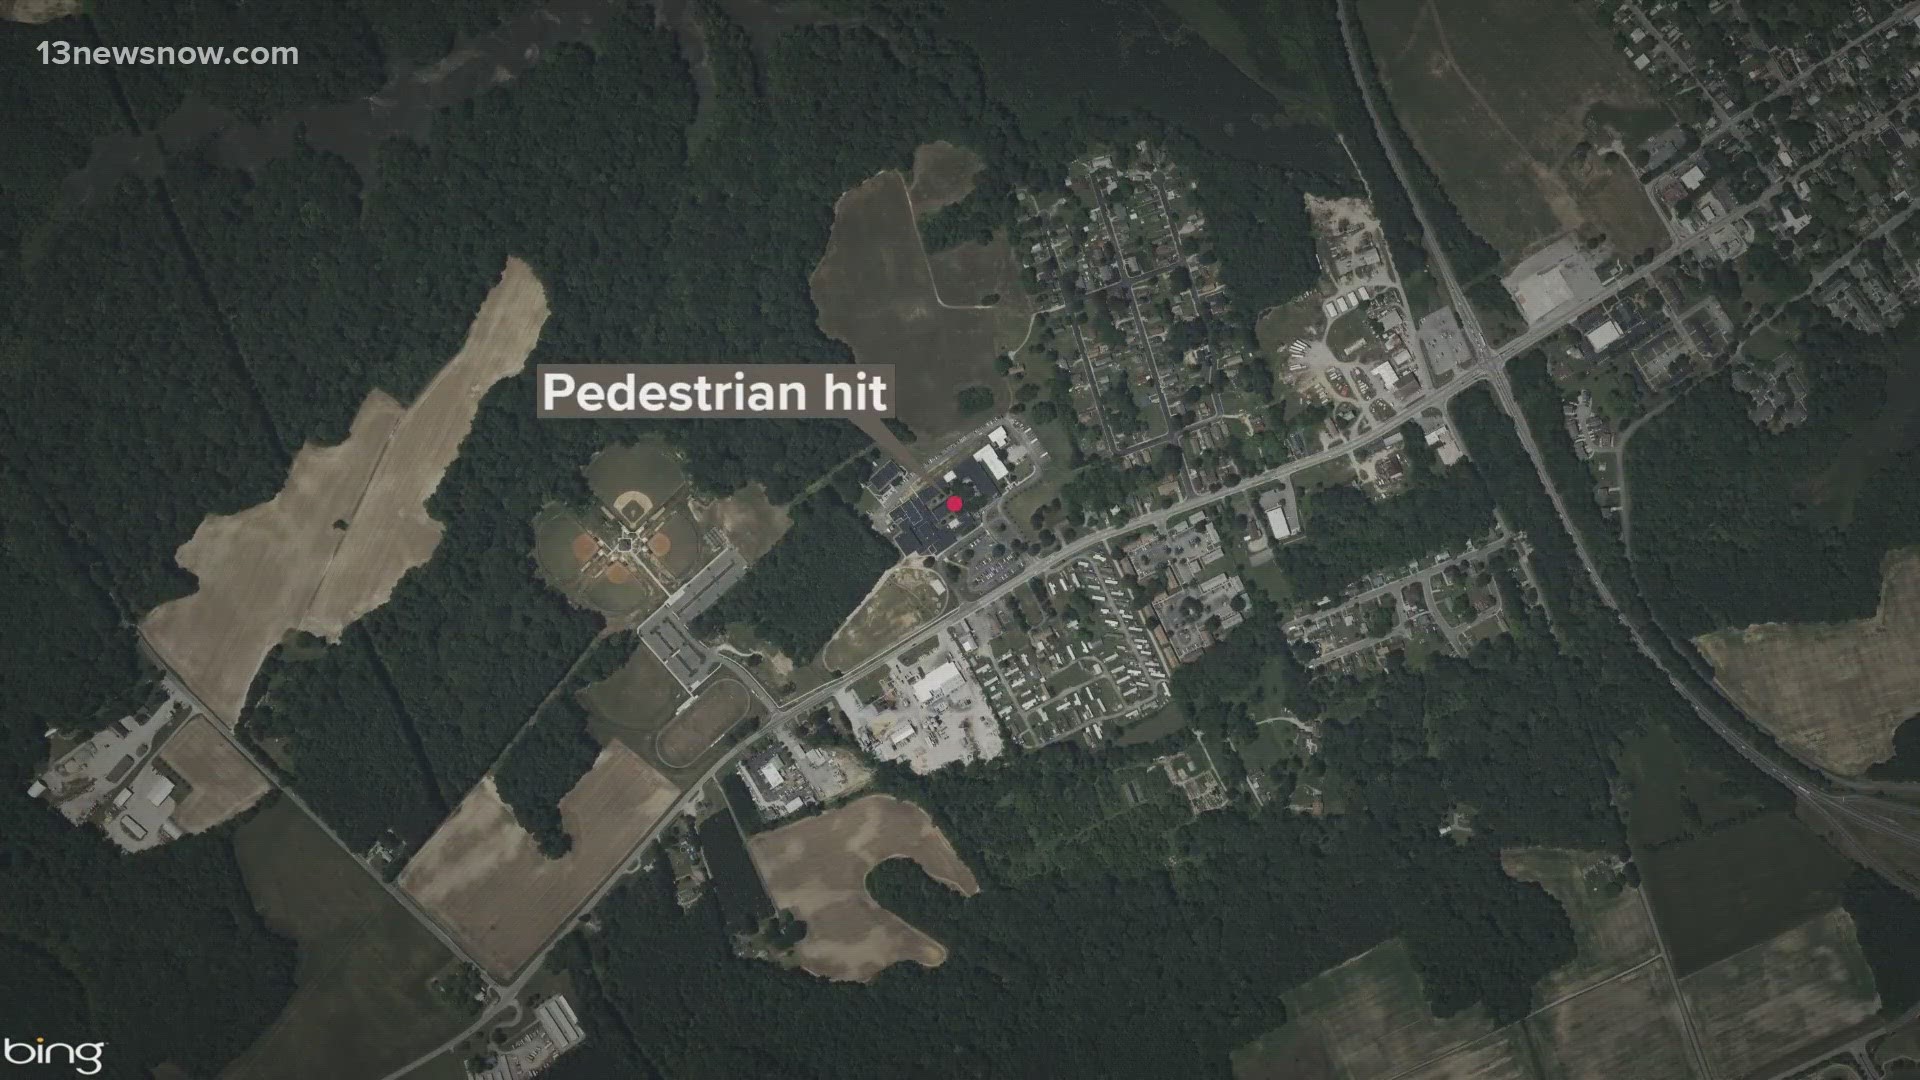 State police said the pedestrian suffered serious, life-threatening injuries and was flown to Norfolk General Hospital via med-flight.